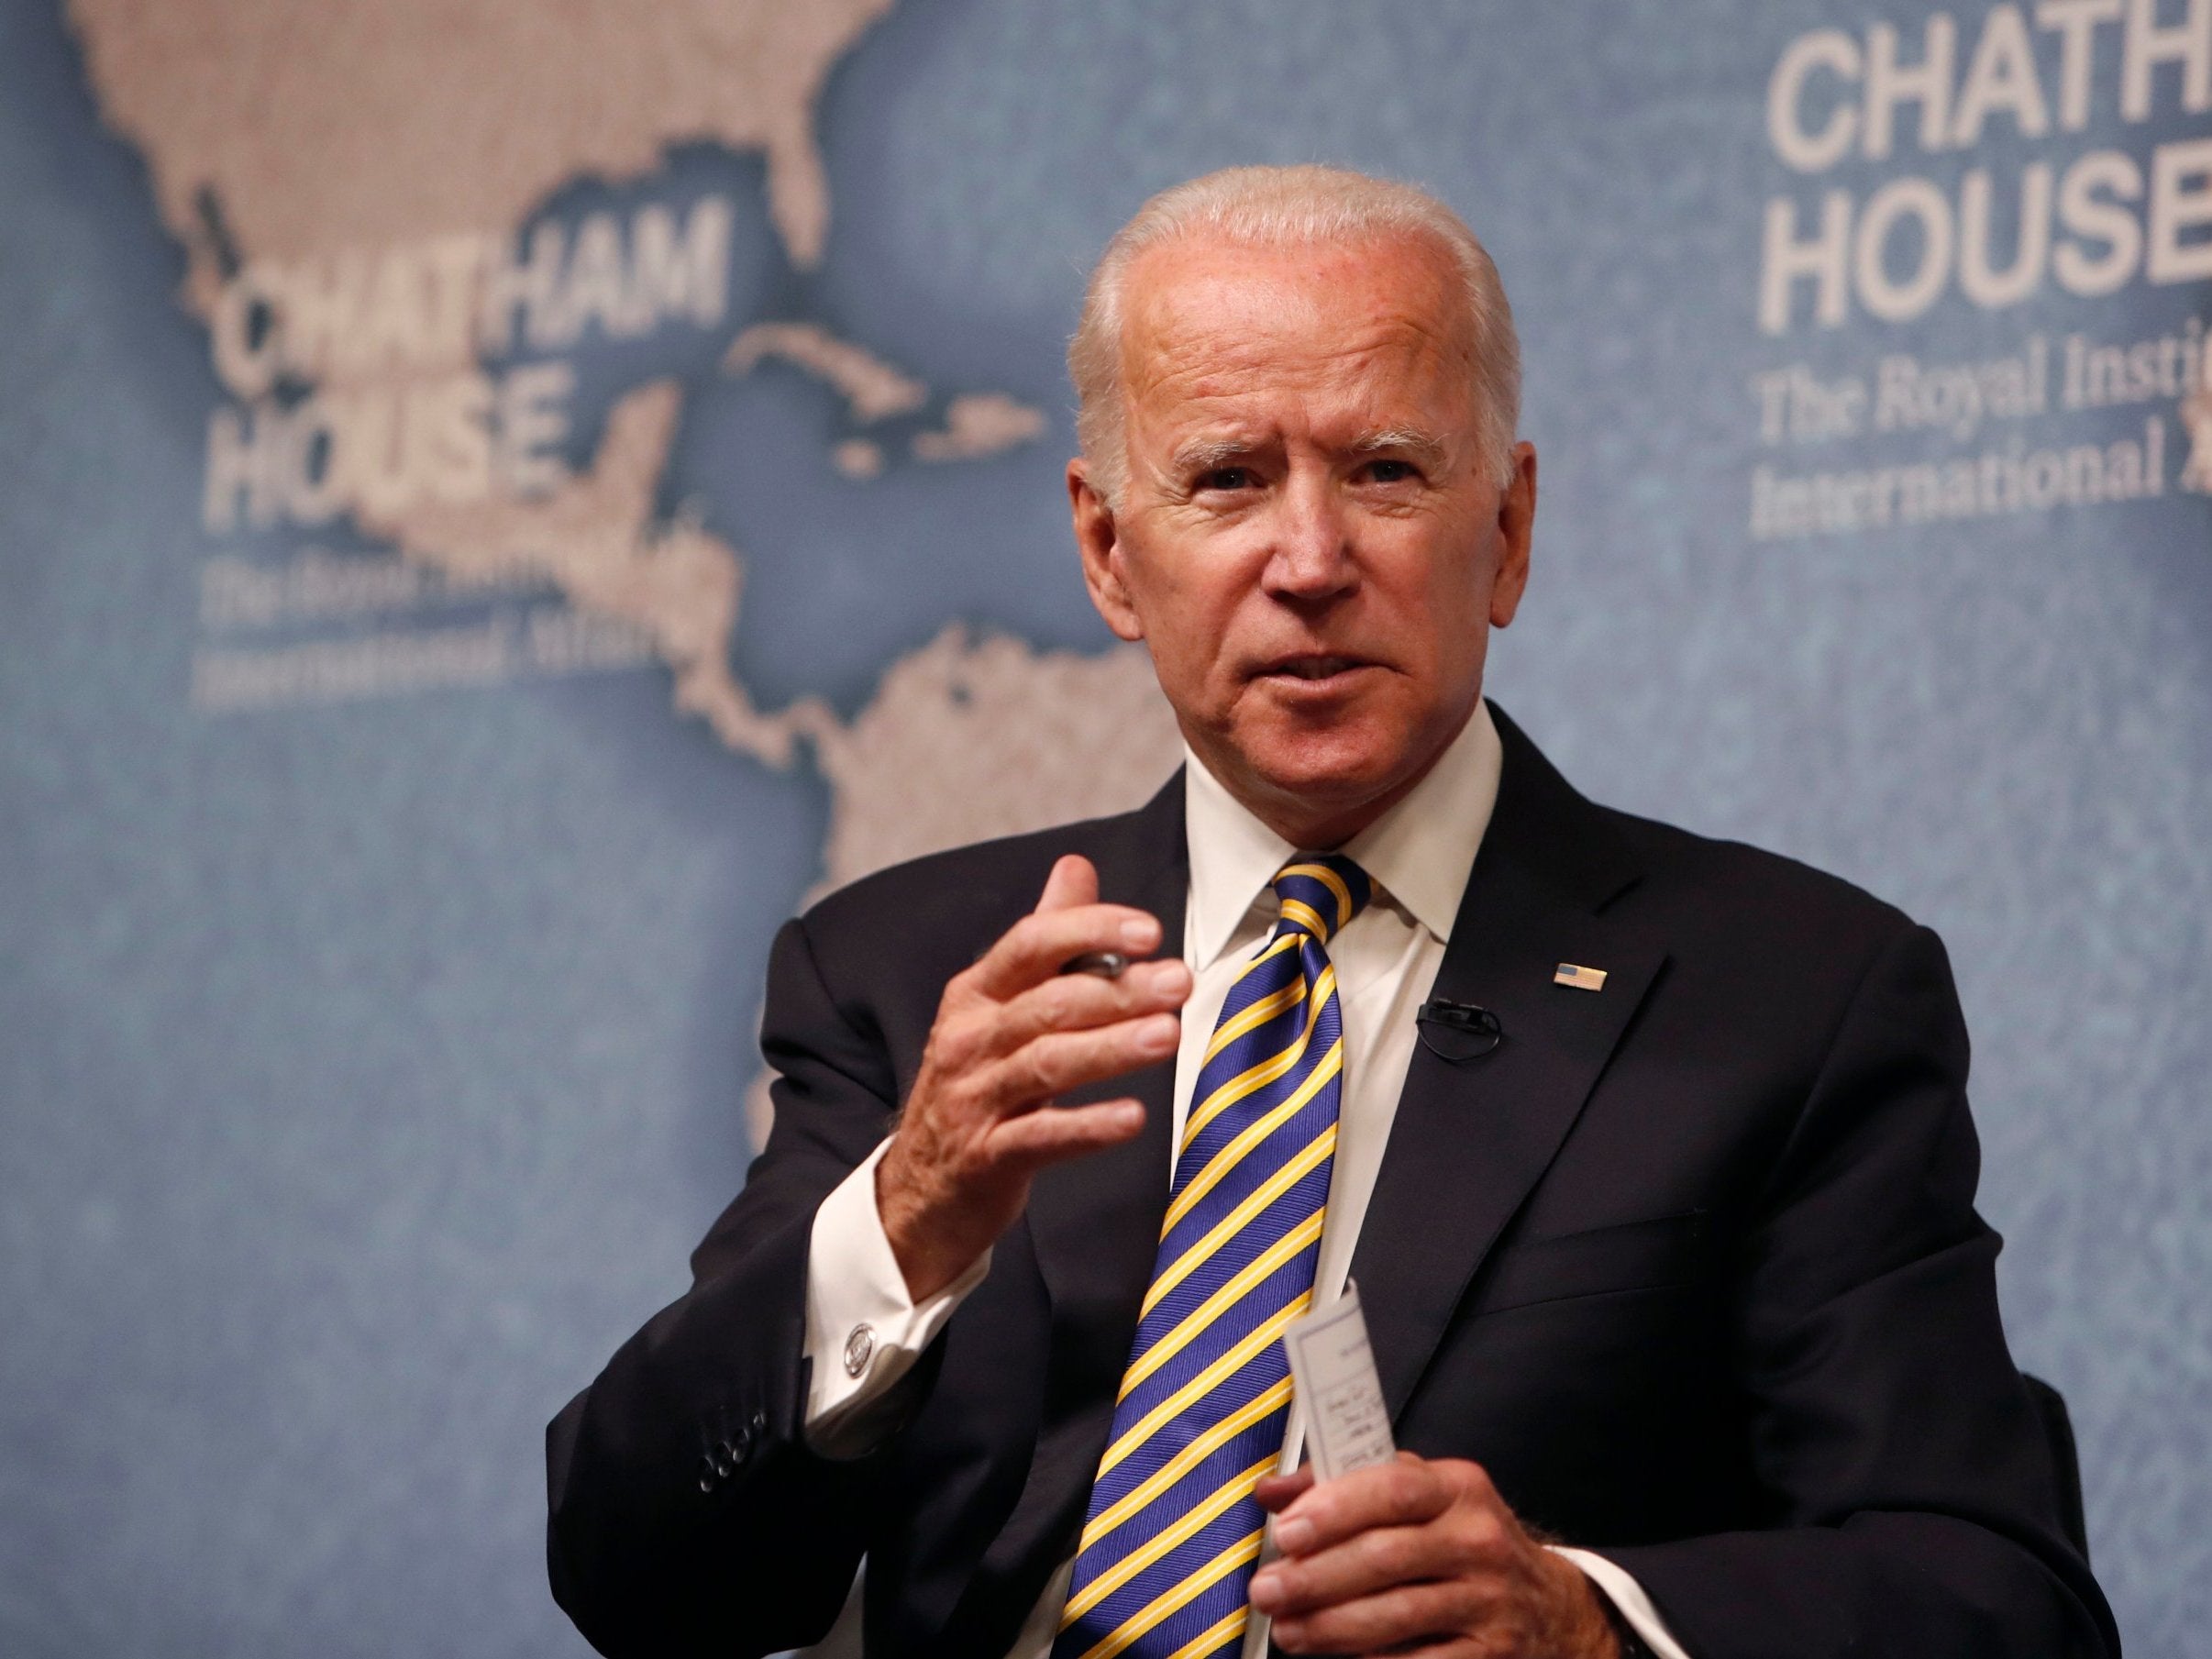 Joe Biden takes a Q&A session after his speech in London